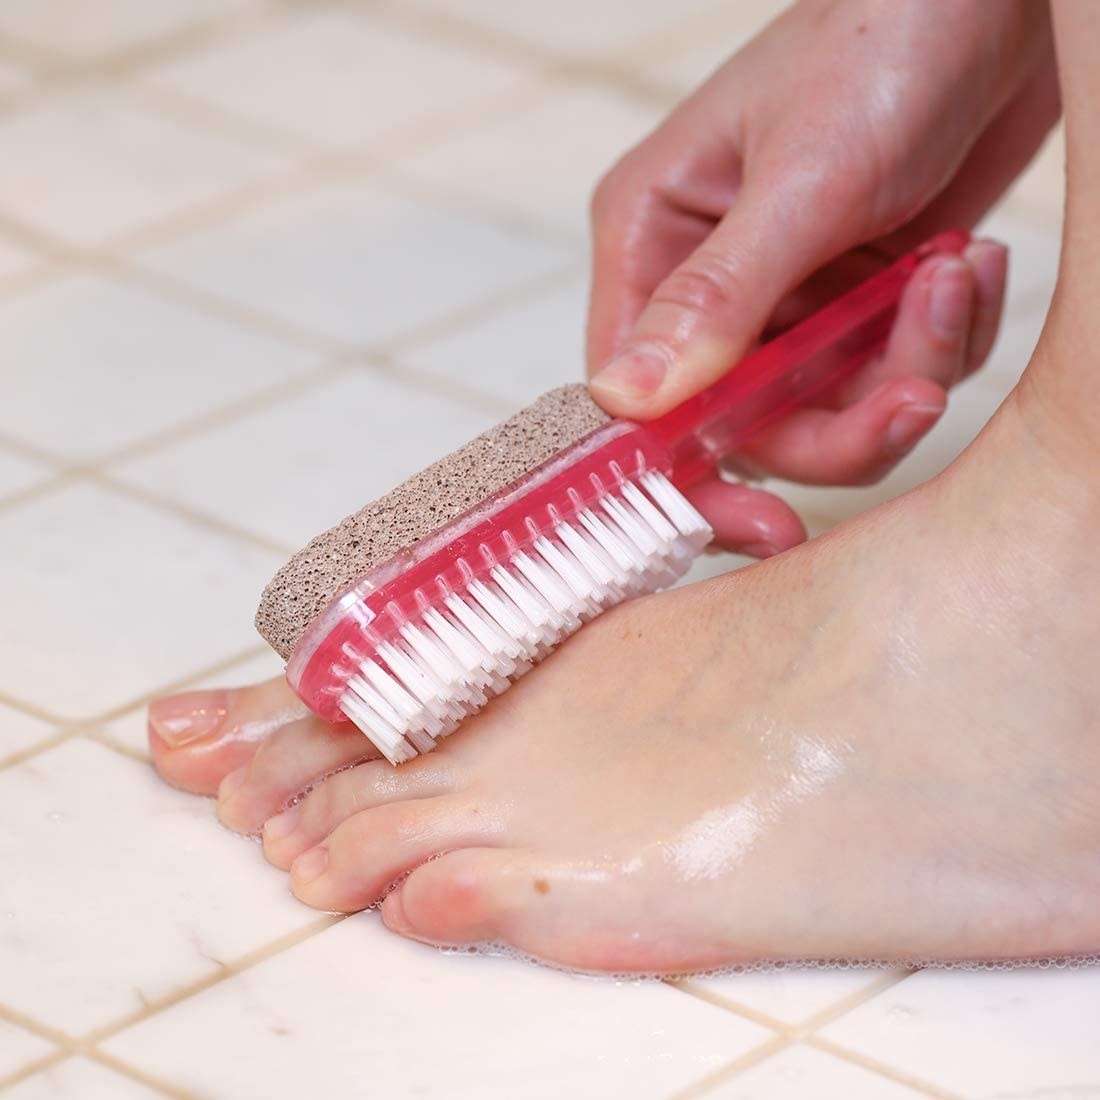 A person scrubbing their foot in the shower